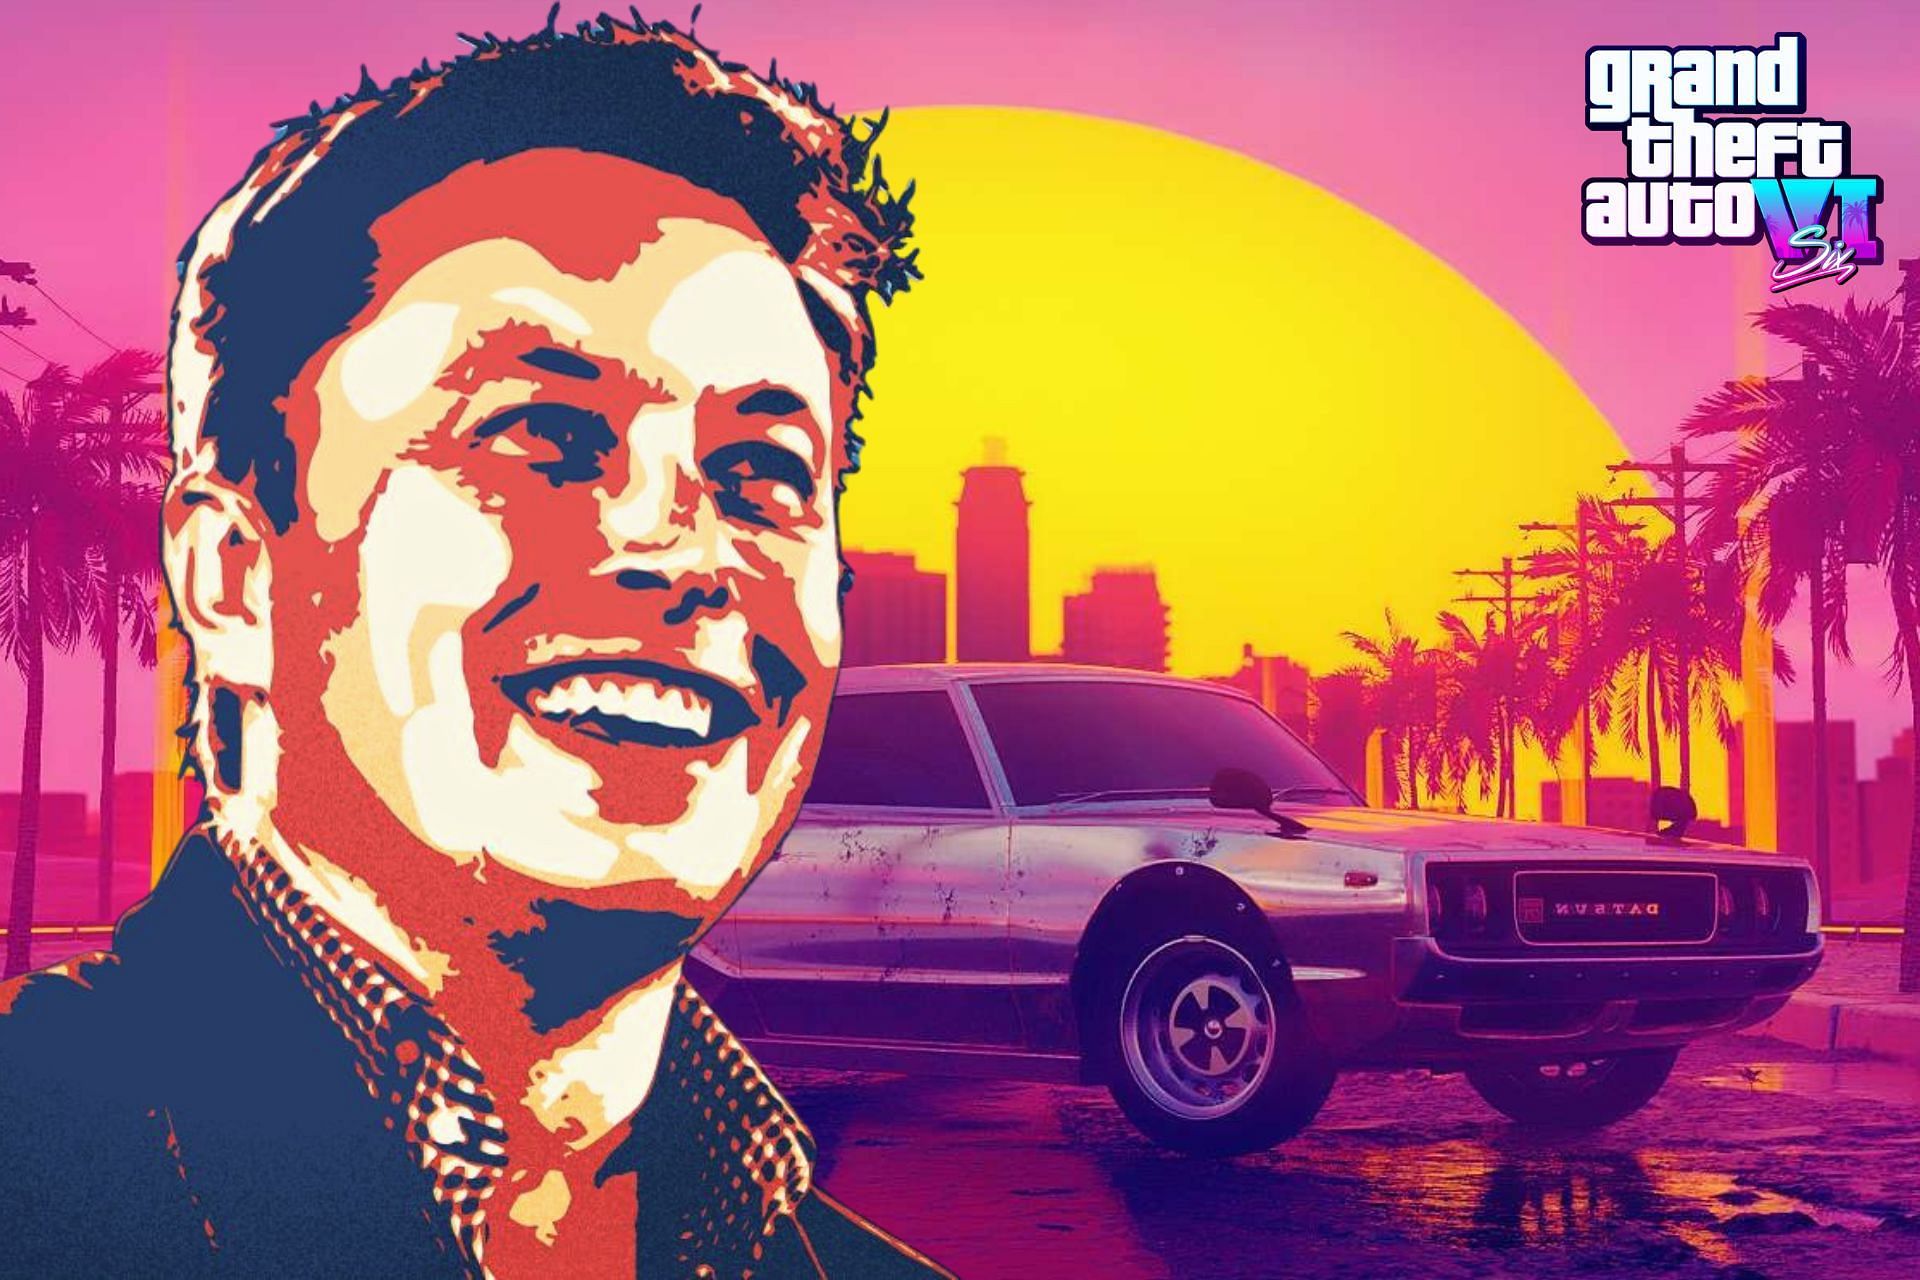 An Elon Musk spoof character could be a fun addition to GTA 6 (Image via Sportskeeda)